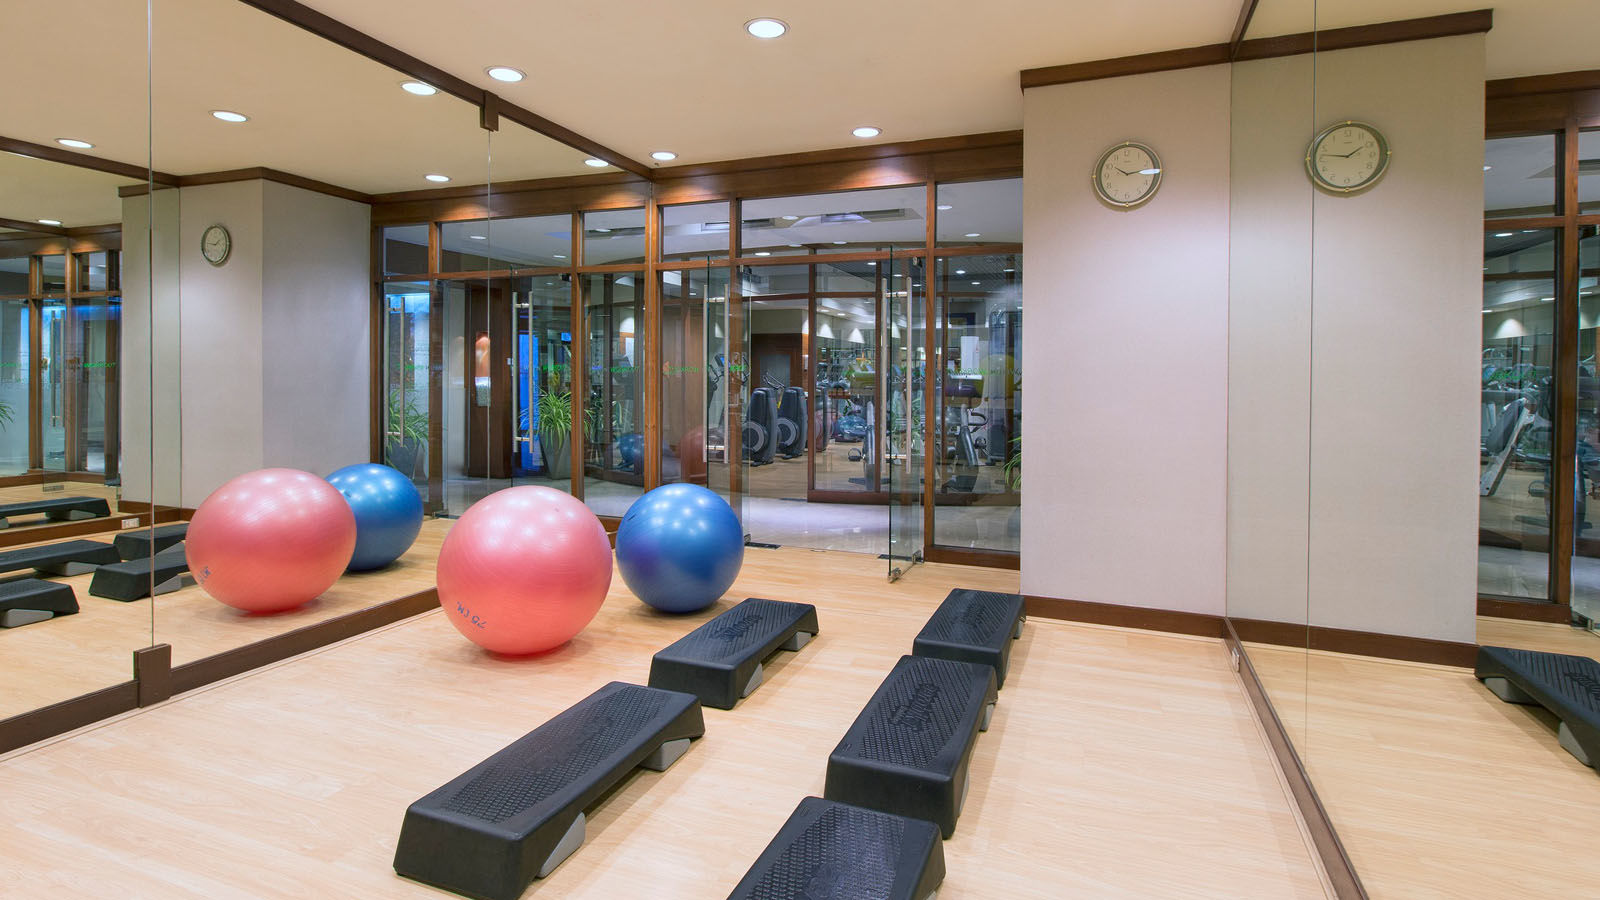 6 Day Westin workout room for Burn Fat fast